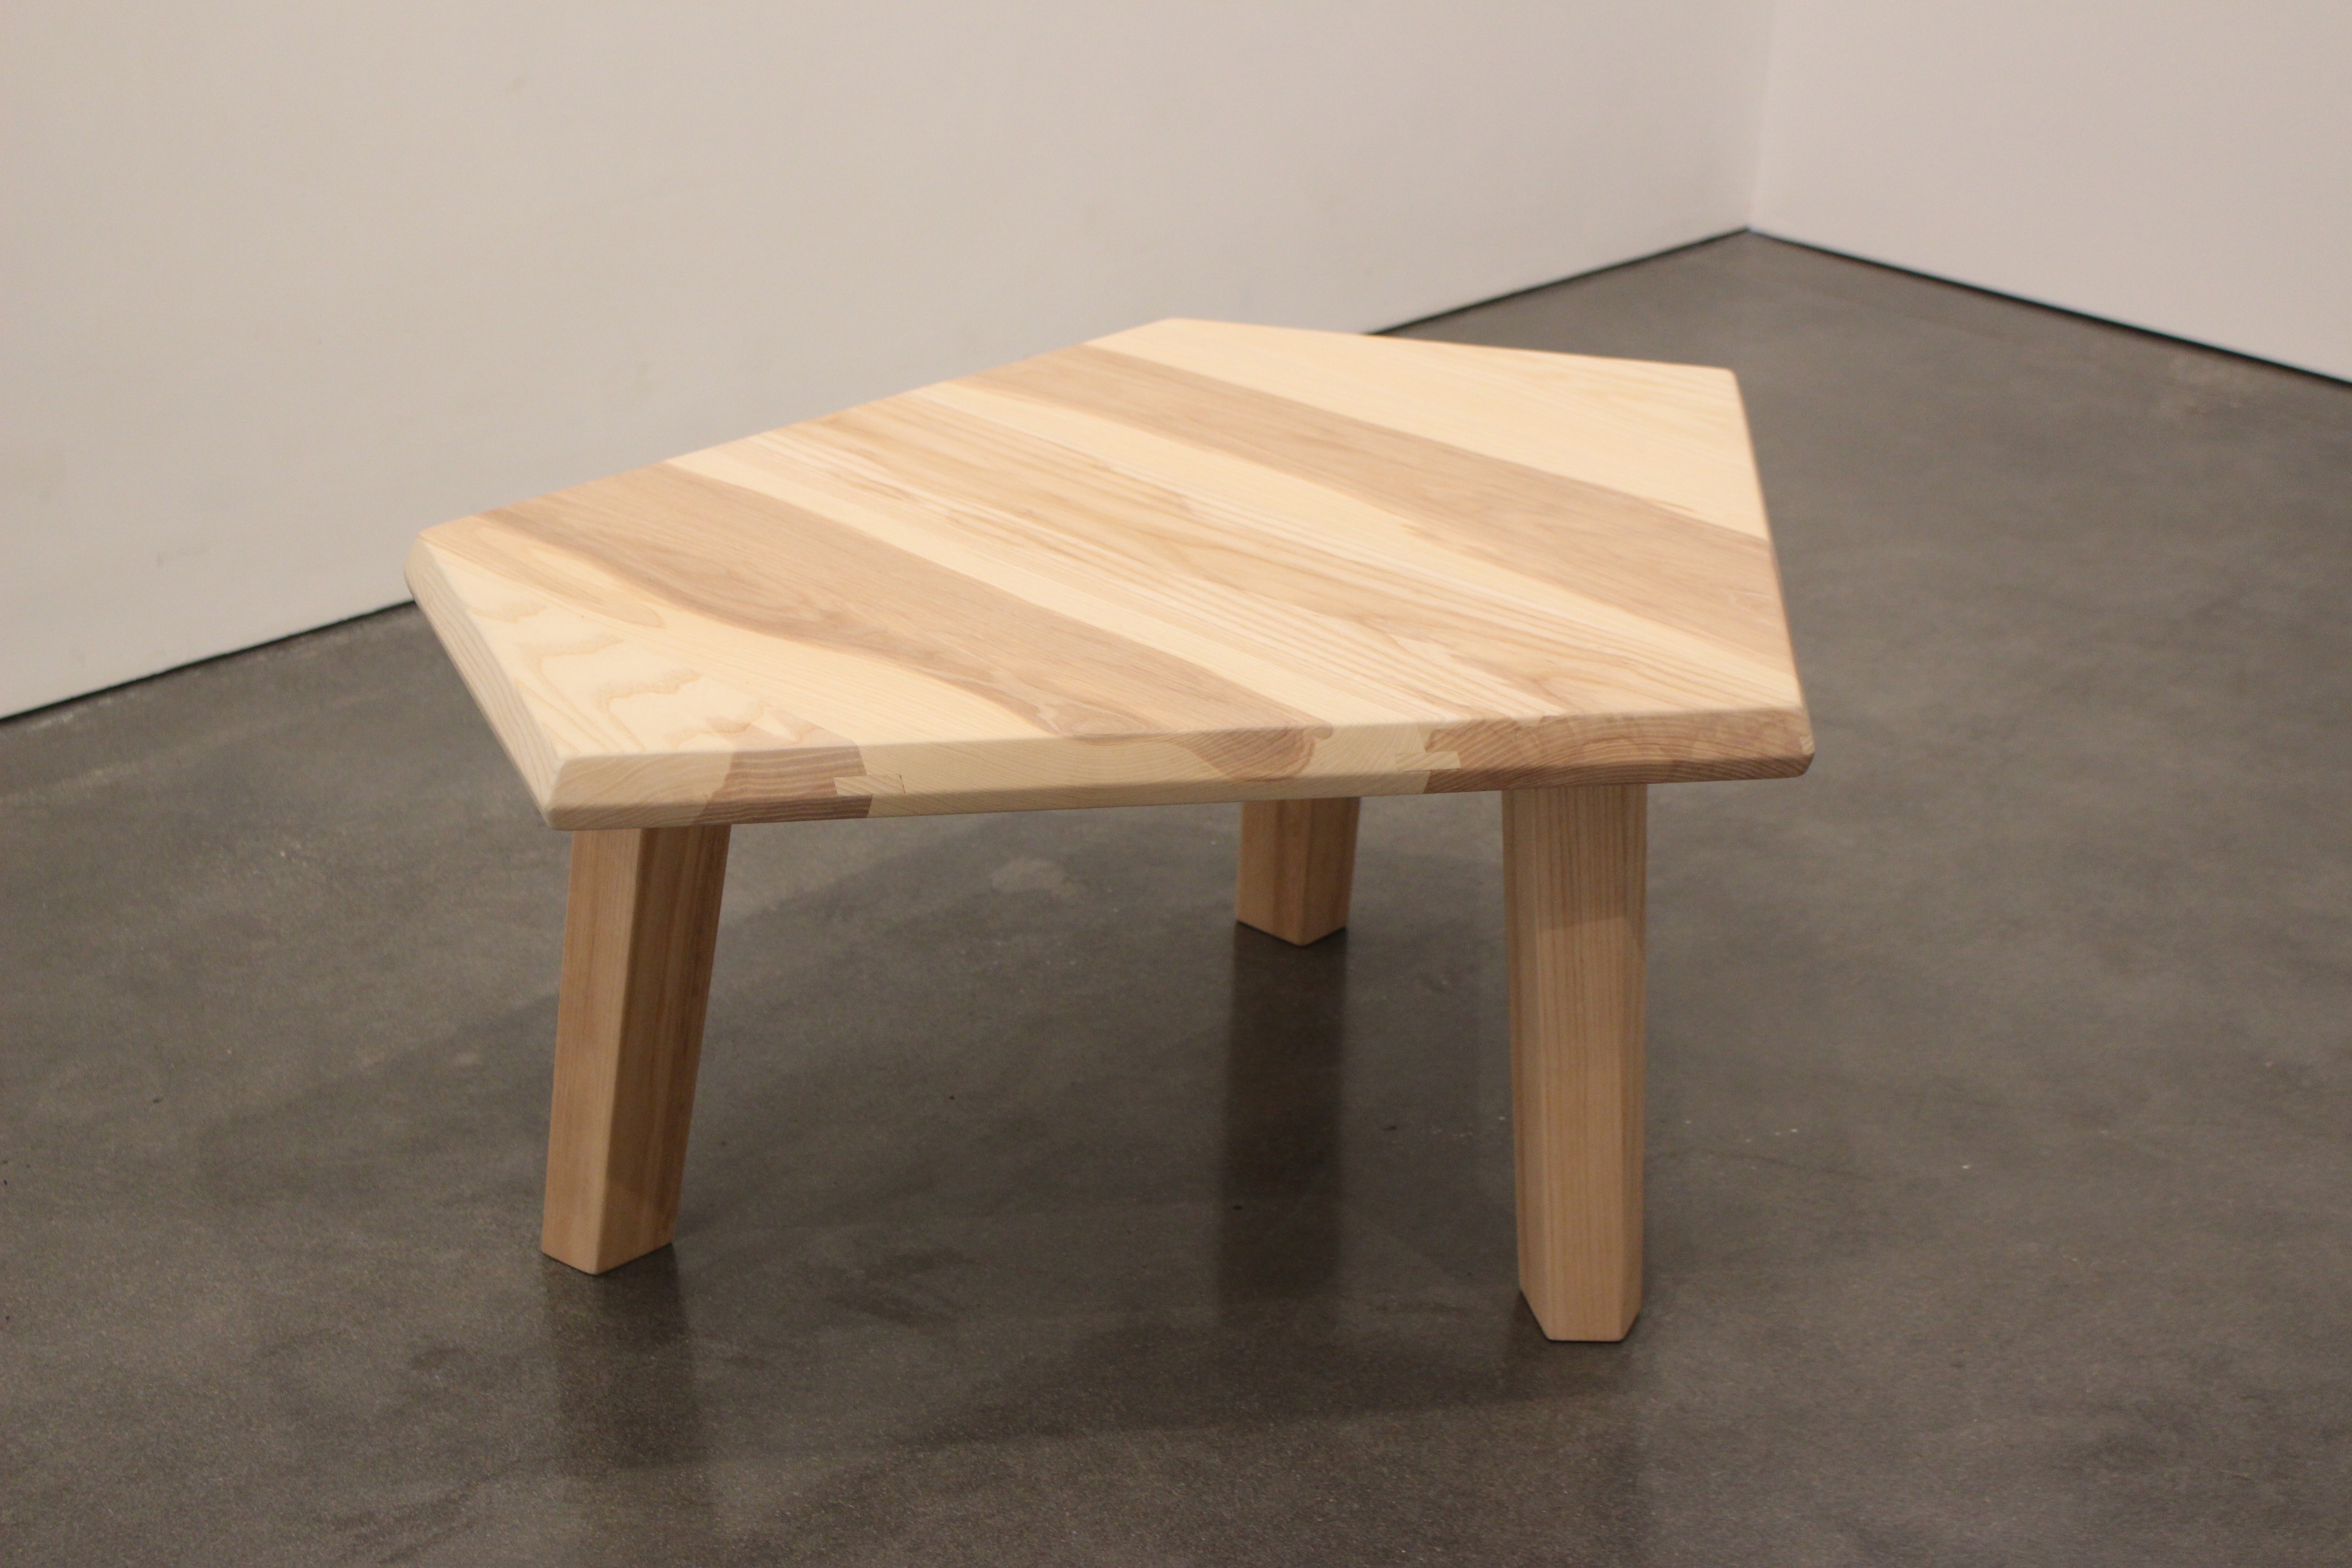 Knotz Small Coffee Table